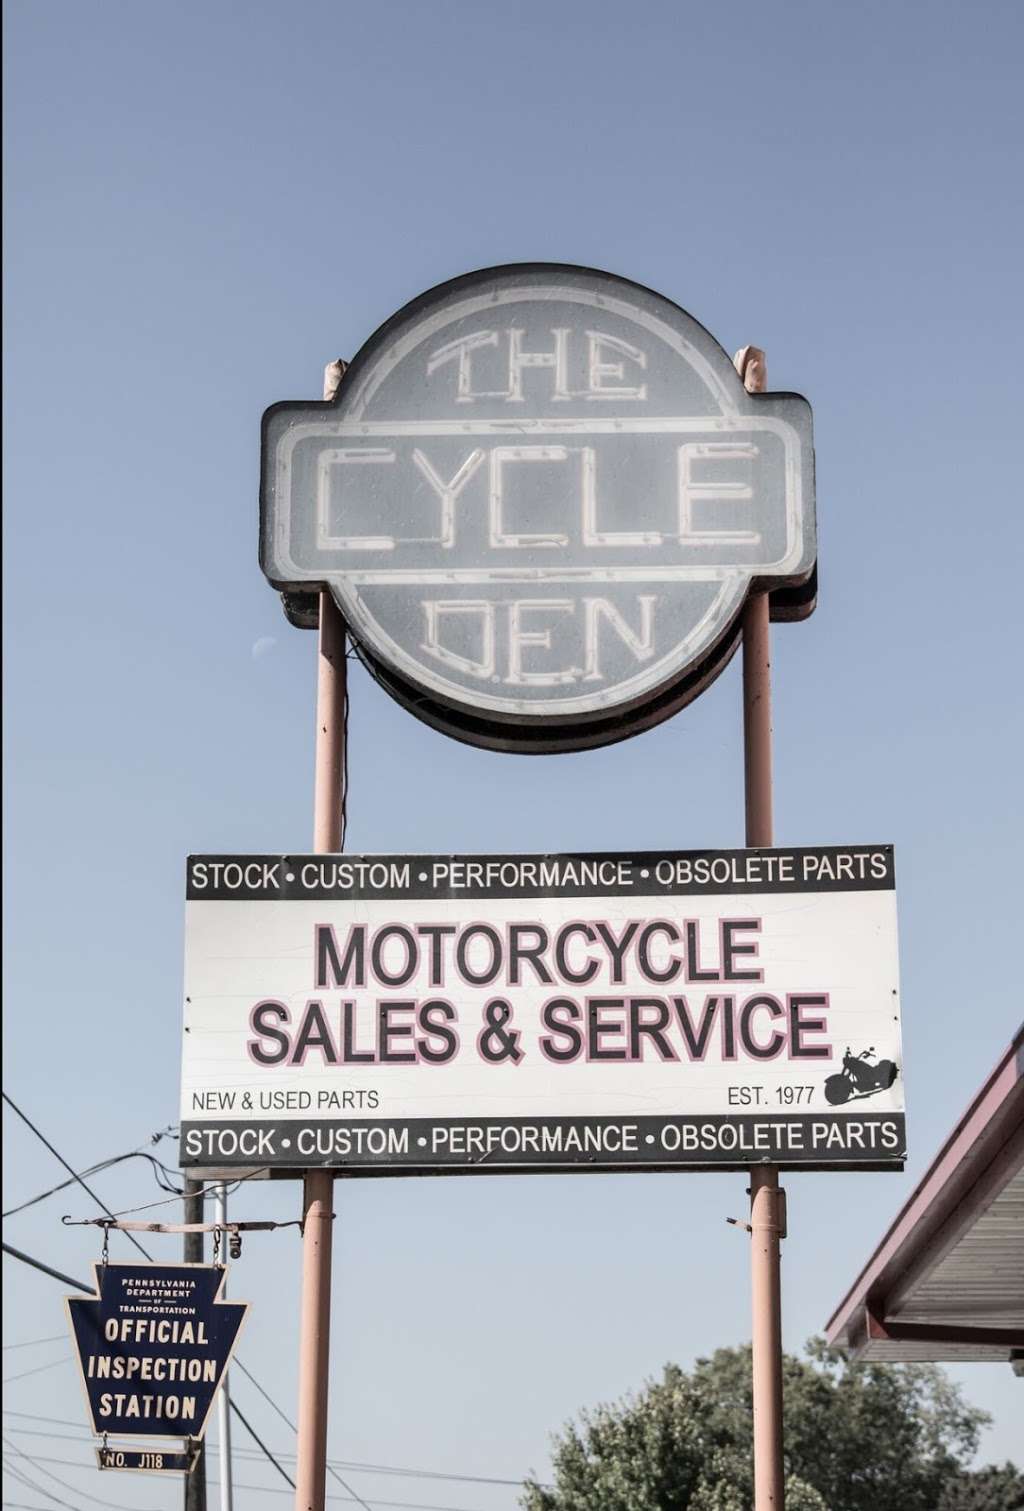 Cycle Den | 1115 Lancaster Ave, Columbia, PA 17512 | Phone: (717) 684-9733